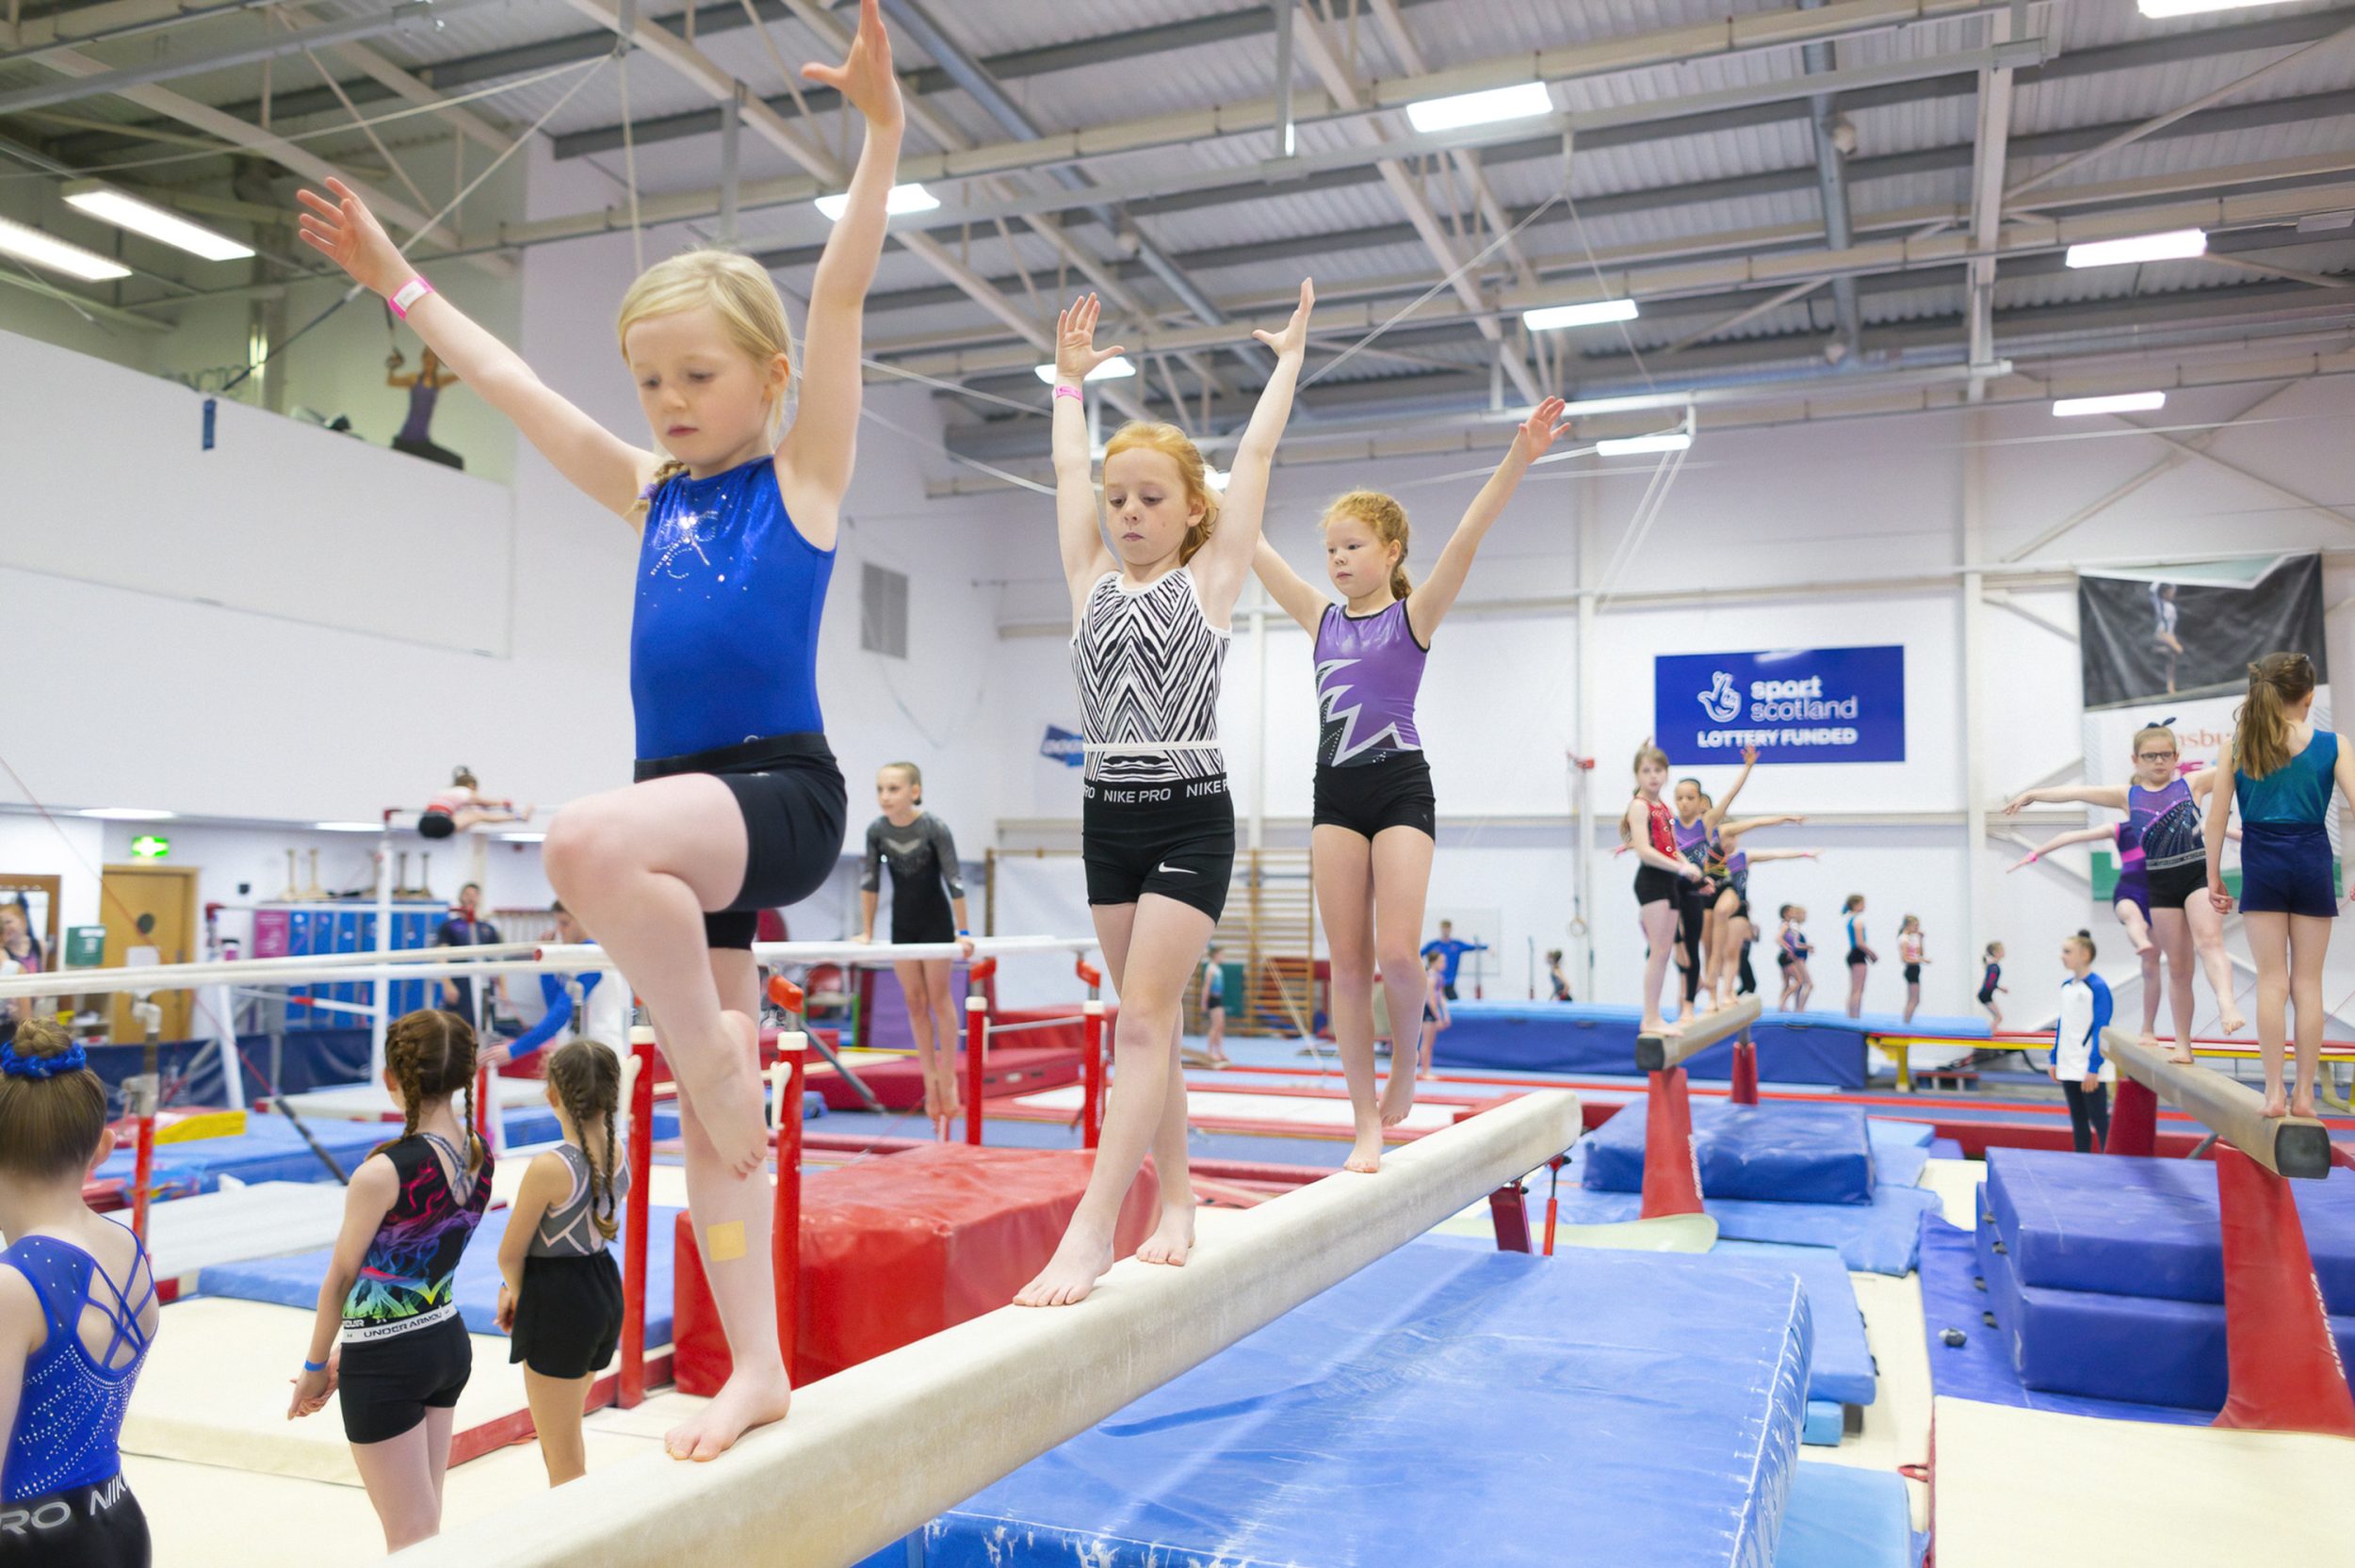 Three women's artistic gymnasts train on the beam at the 2022 commonwealth expereince day